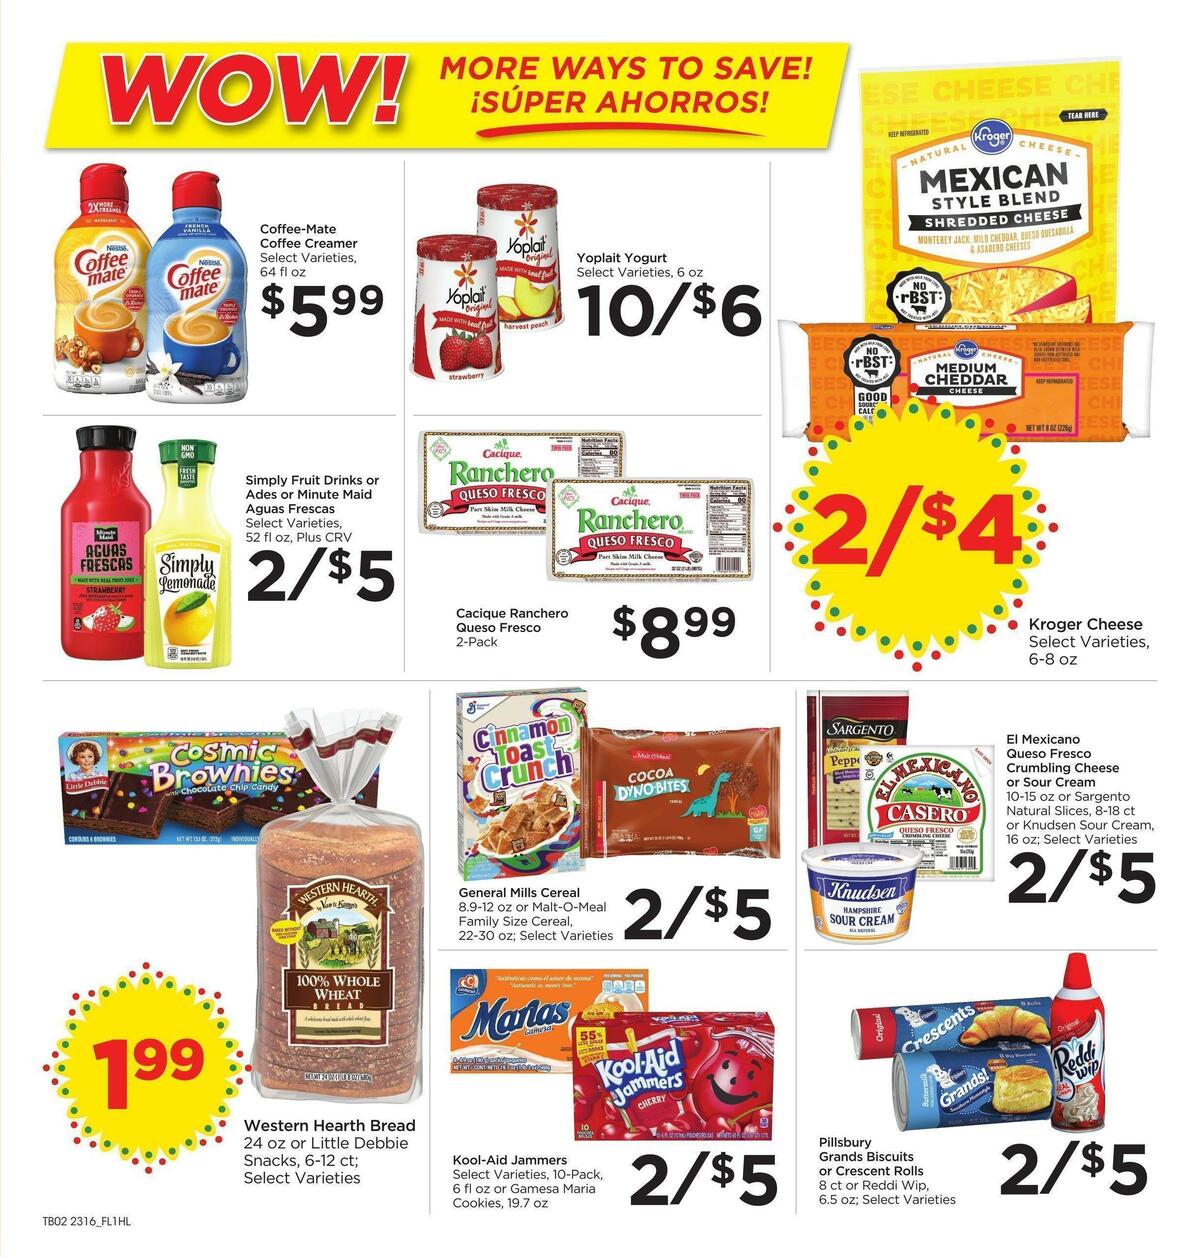 Food 4 Less Weekly Ad from May 17